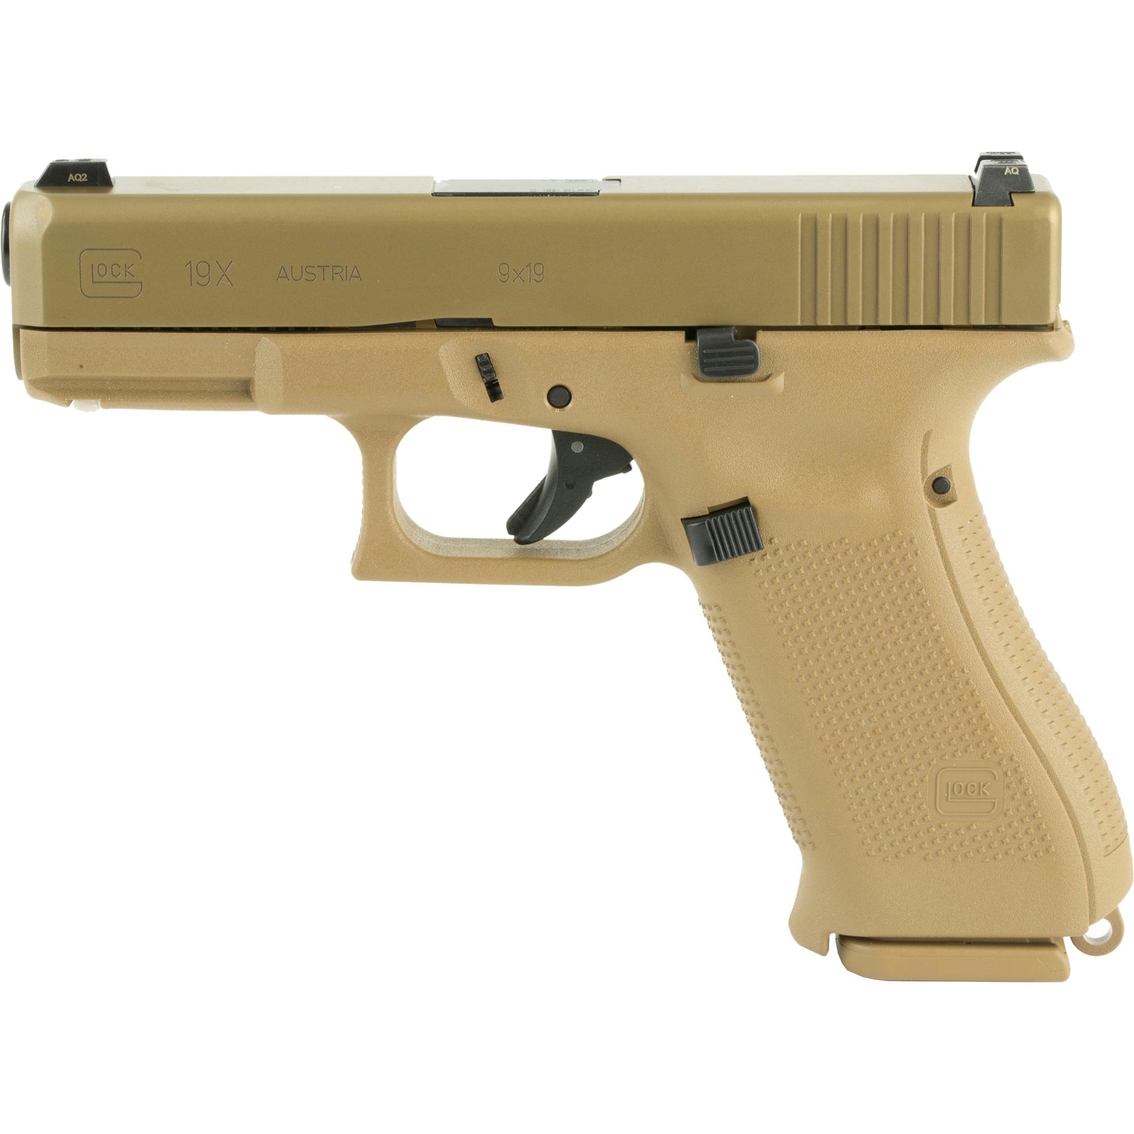 Glock 19X 9MM 4.02 in. Barrel 10 Rds 3-Mags Pistol Coyote Brown - Image 2 of 3